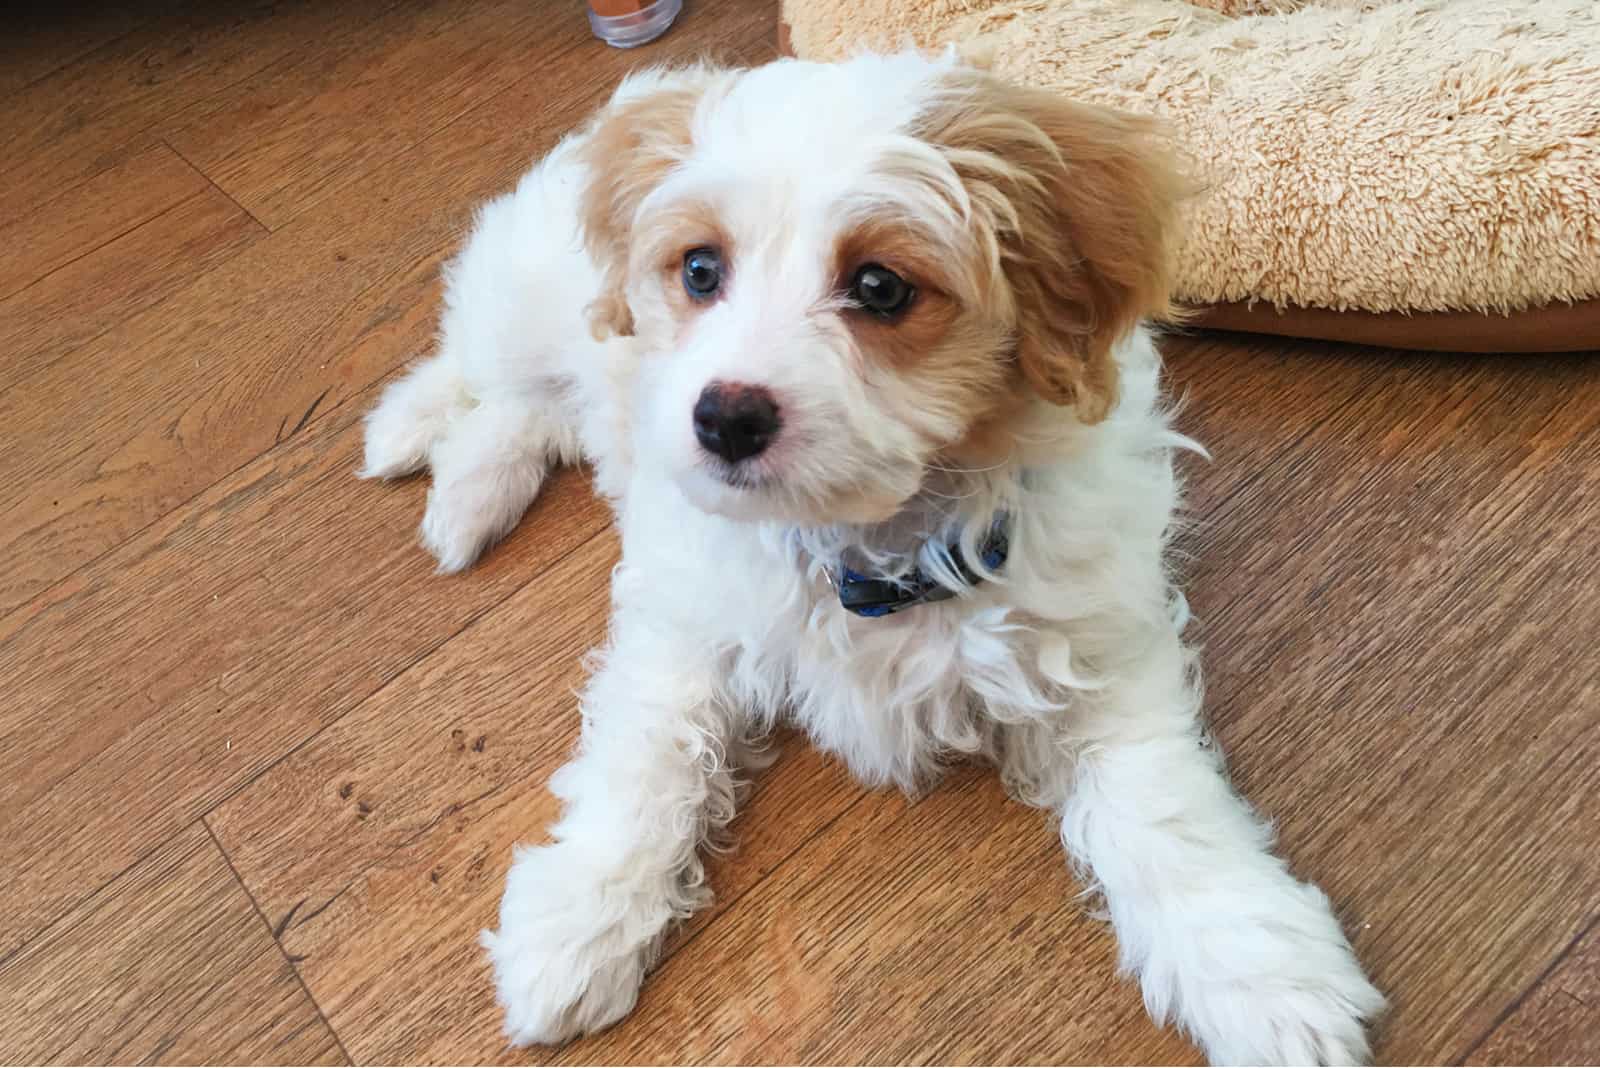 a cute puppy sitting on the floor